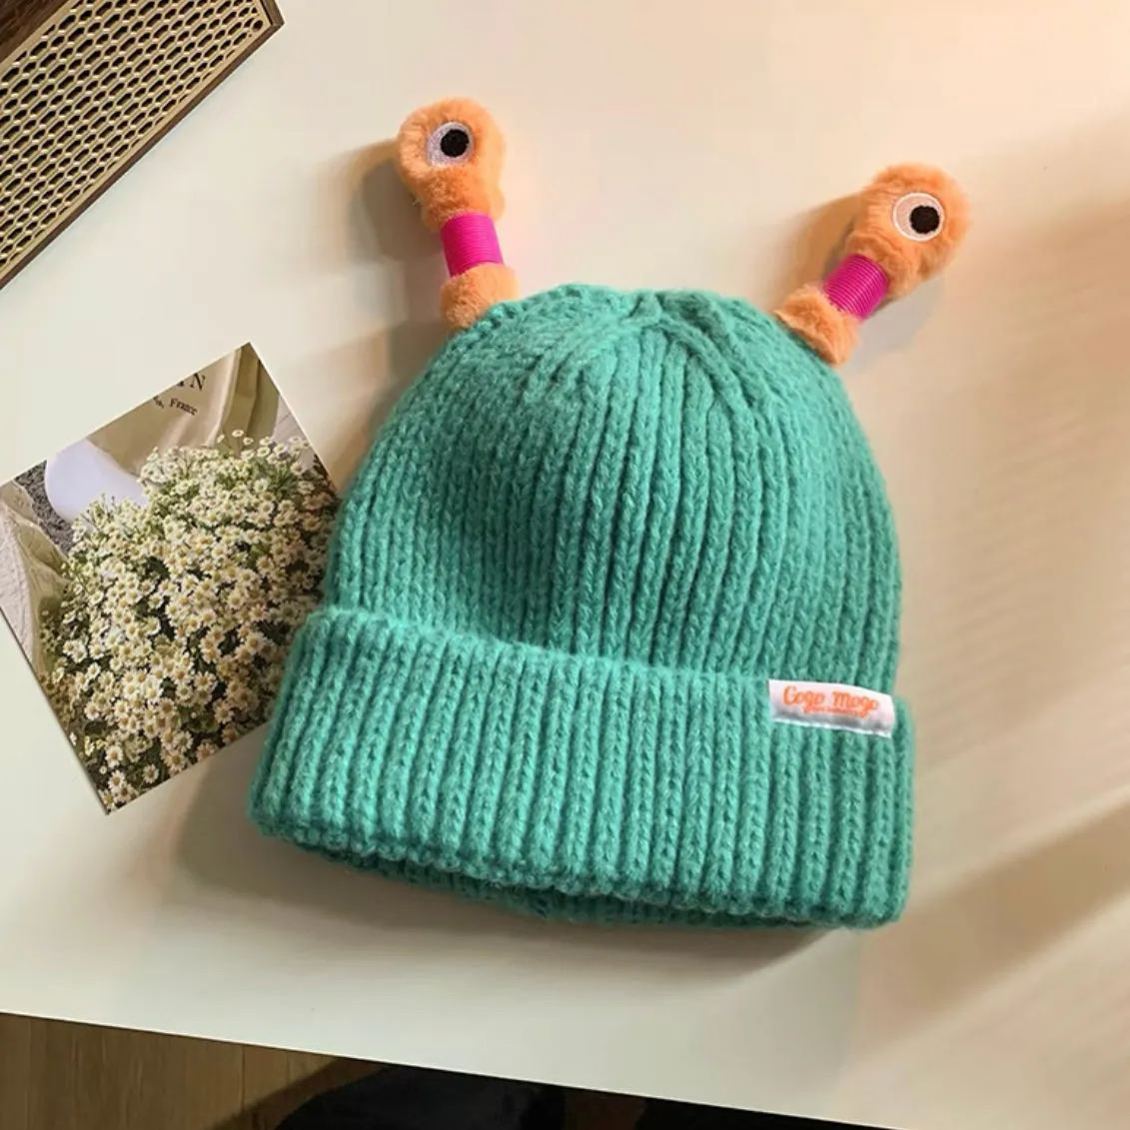 🔥HOT SALE - 49% OFF🔥Child Cute Glowing Little Monster Knit Hat